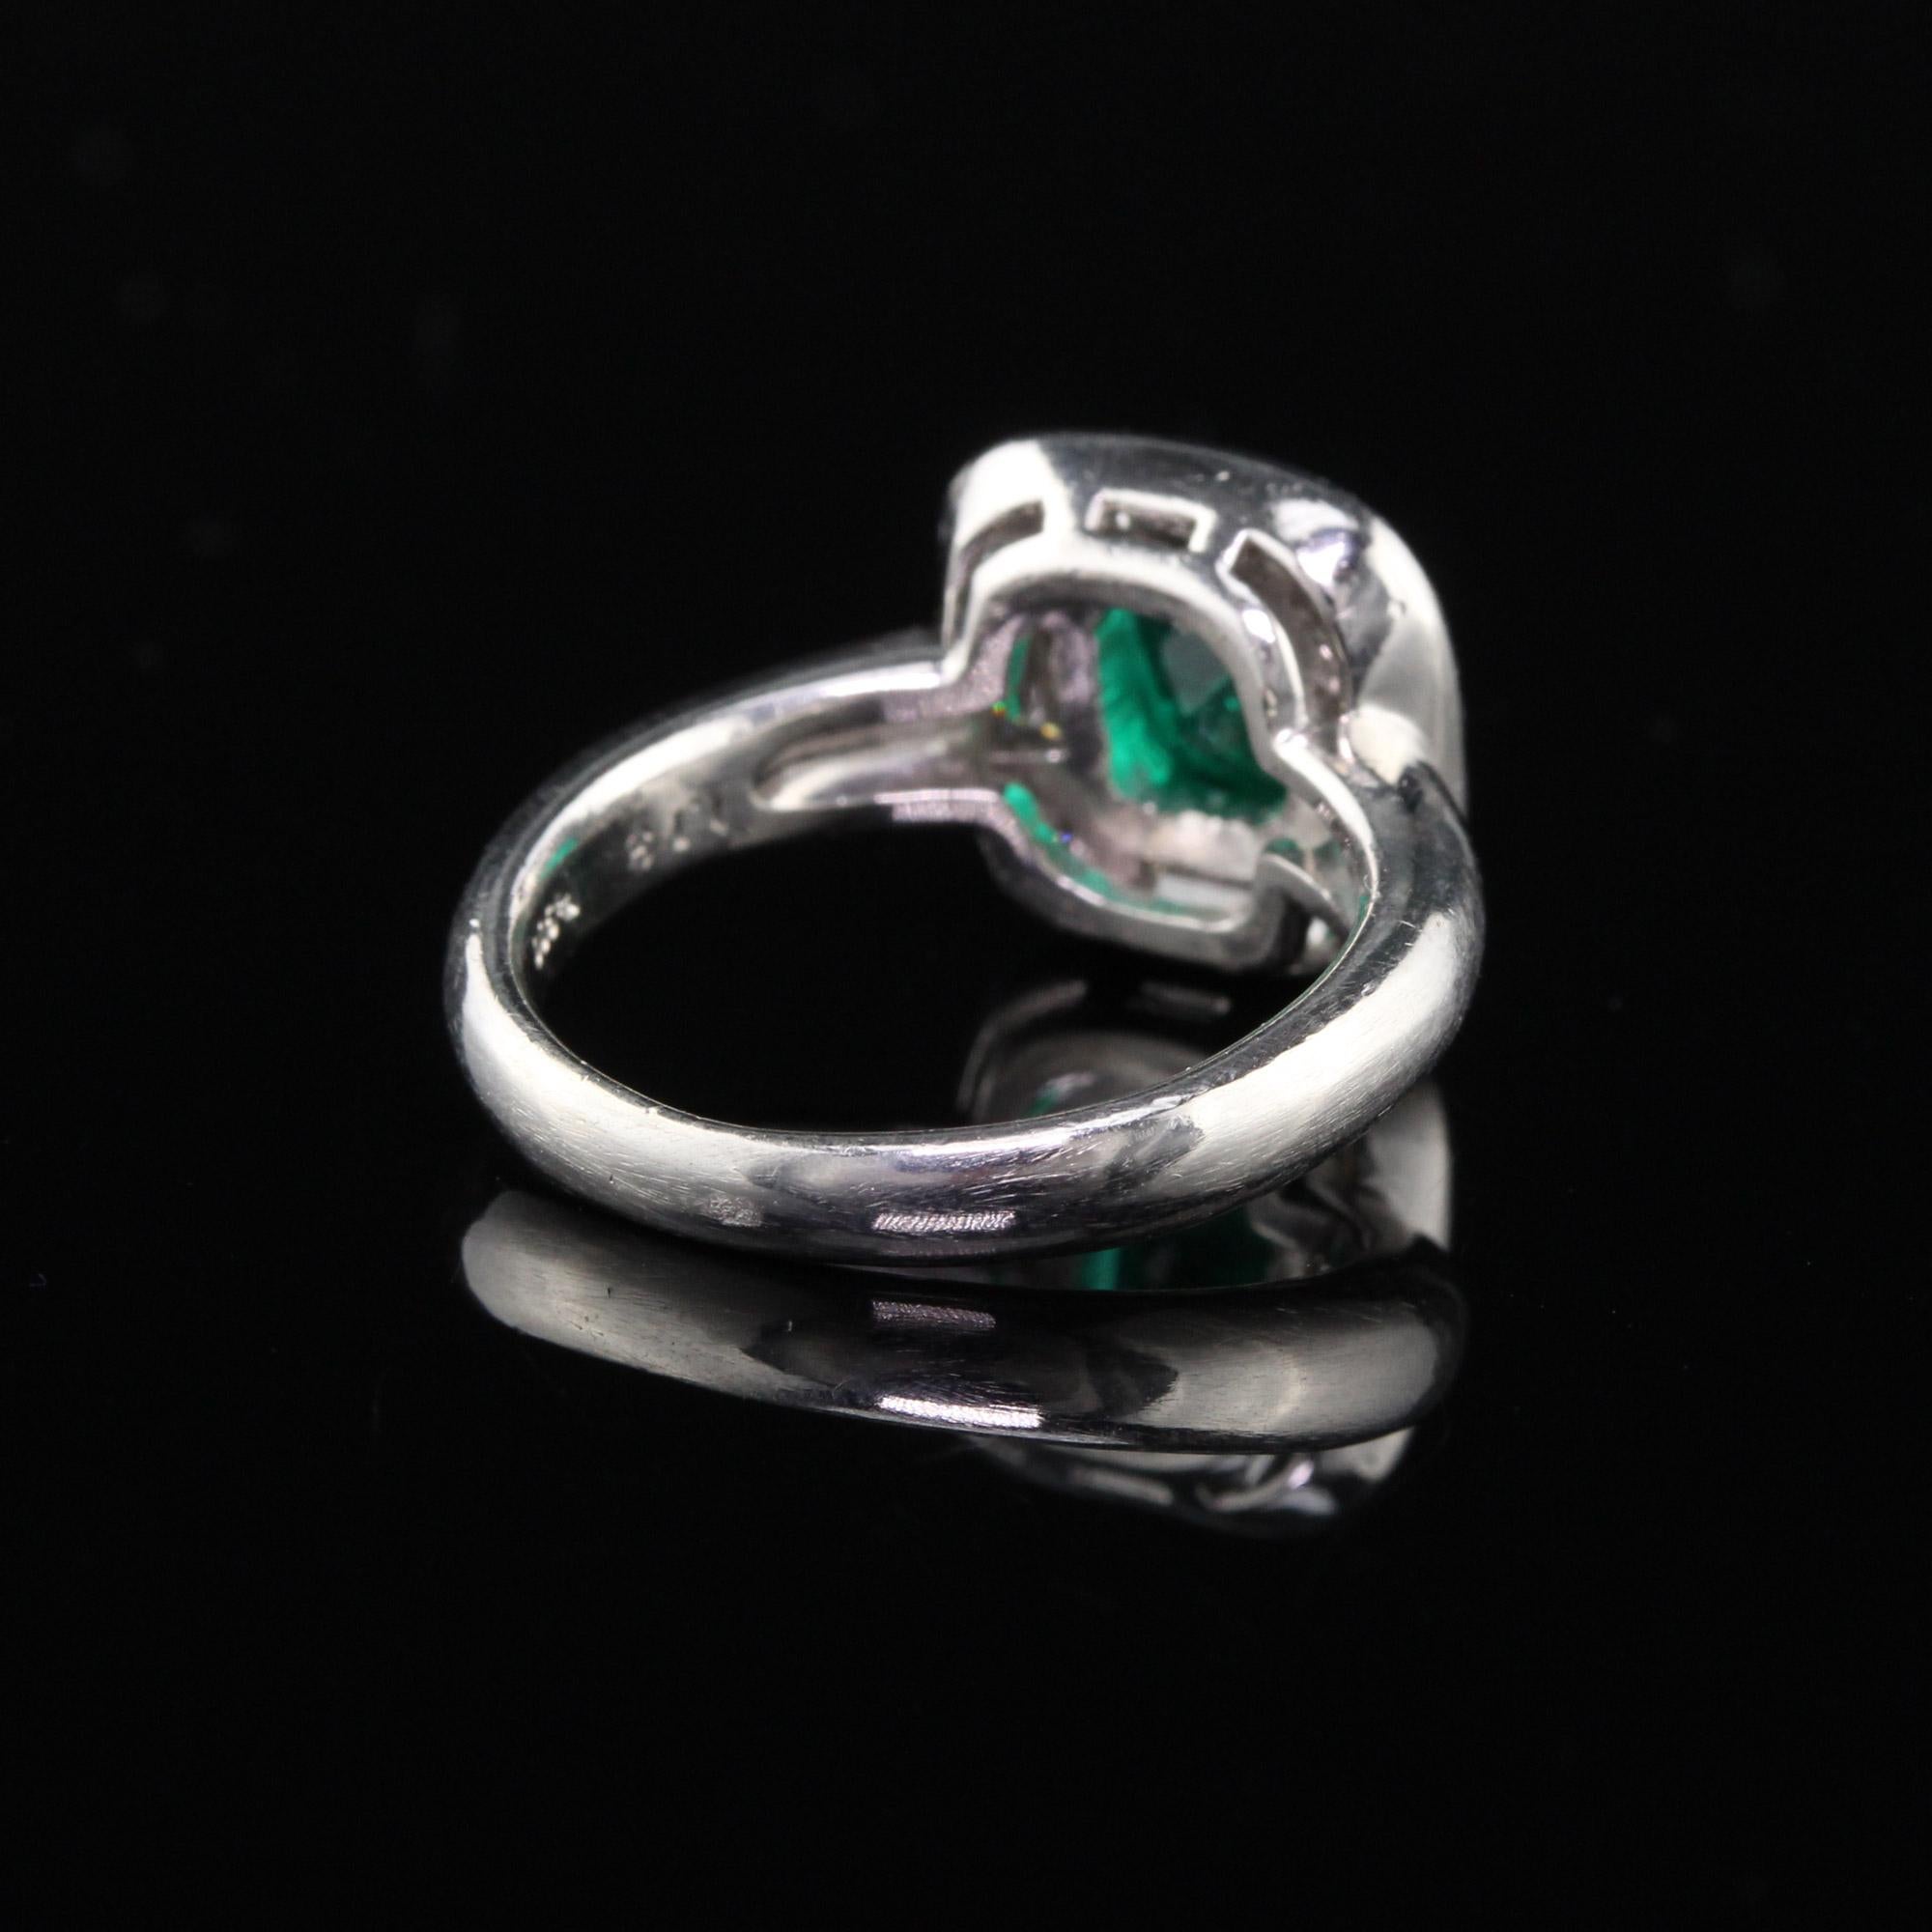 Vintage Estate Platinum Colombian Emerald and Diamond Ring, GIA Certified 1